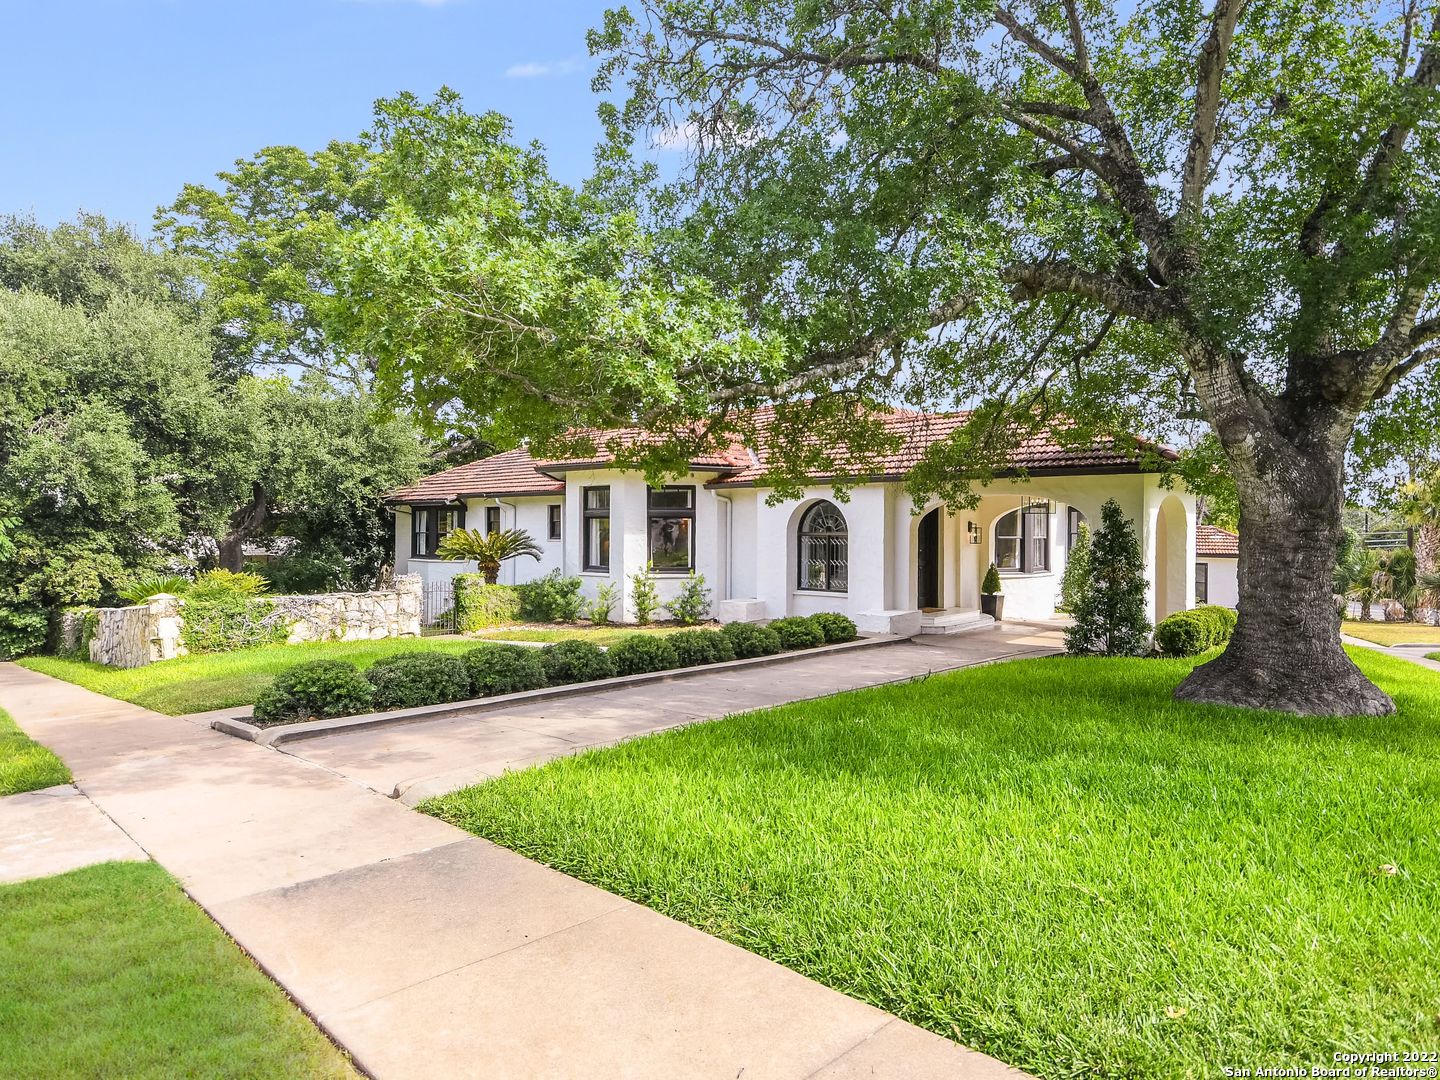 A rare treasure on the market for the first time in 35 years.  An Atlee B. Ayres house located in the heart of Alamo Heights sits on a half-acre corner lot. Three living areas,  the main living area has a fireplace, and one with a balcony overlooking the beautiful backyard. The backyard could accommodate a pool if you desire. Four bedrooms, three full bathrooms, and two half bathrooms. Two bedrooms and one living area are downstairs. A Palmer Todd kitchen double ovens, steam oven, and double dishwashers. A separate casita that could be used as an office/maid's quarters. Come quick, this listing will take your breath away. Main House is 3,888 sq.ft and Casita is 213 sq.ft.